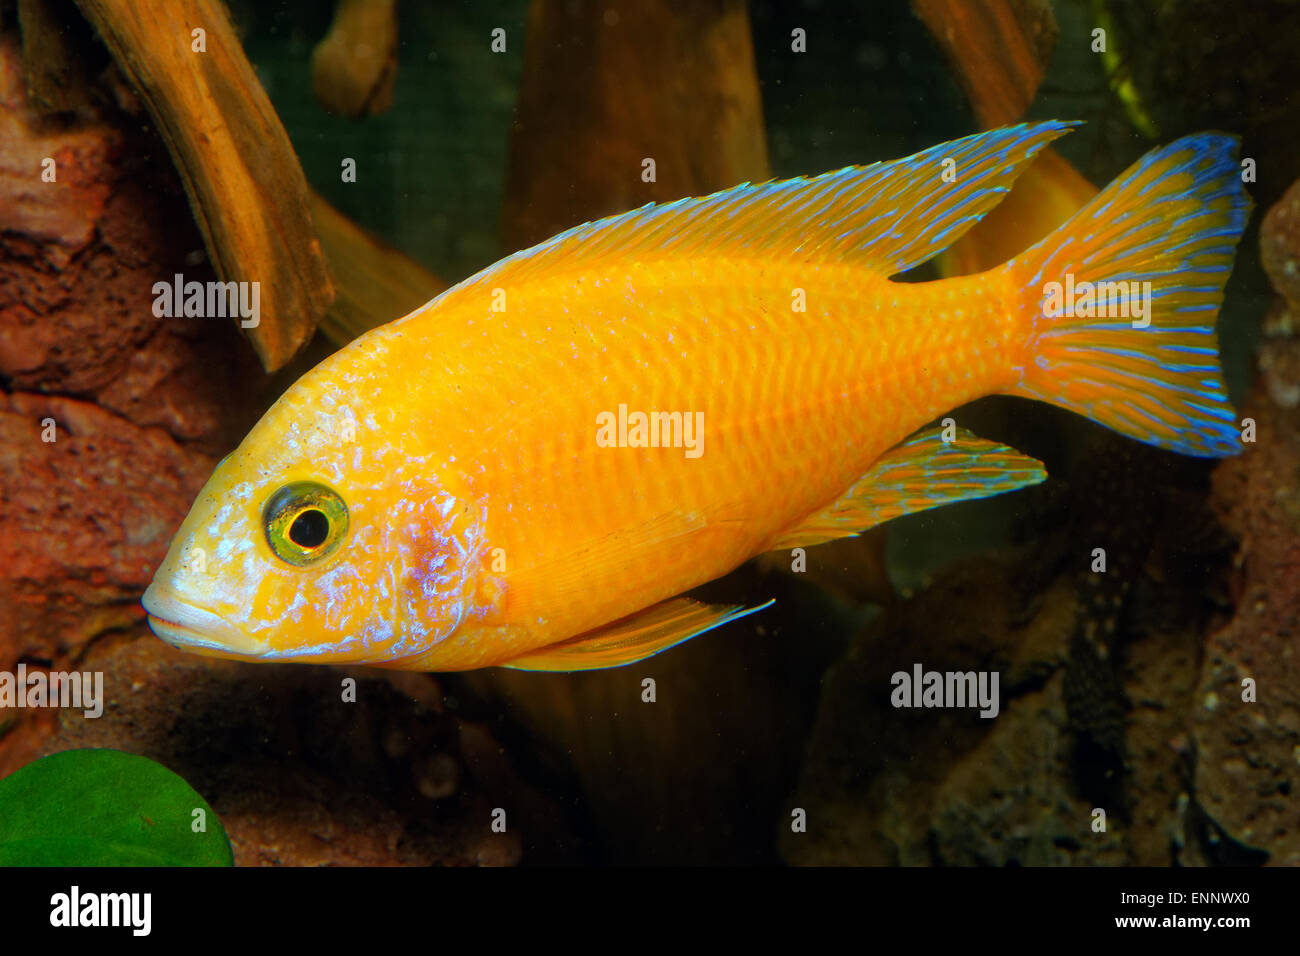 Male of cichlid fish from genus Aulonocara. Stock Photo